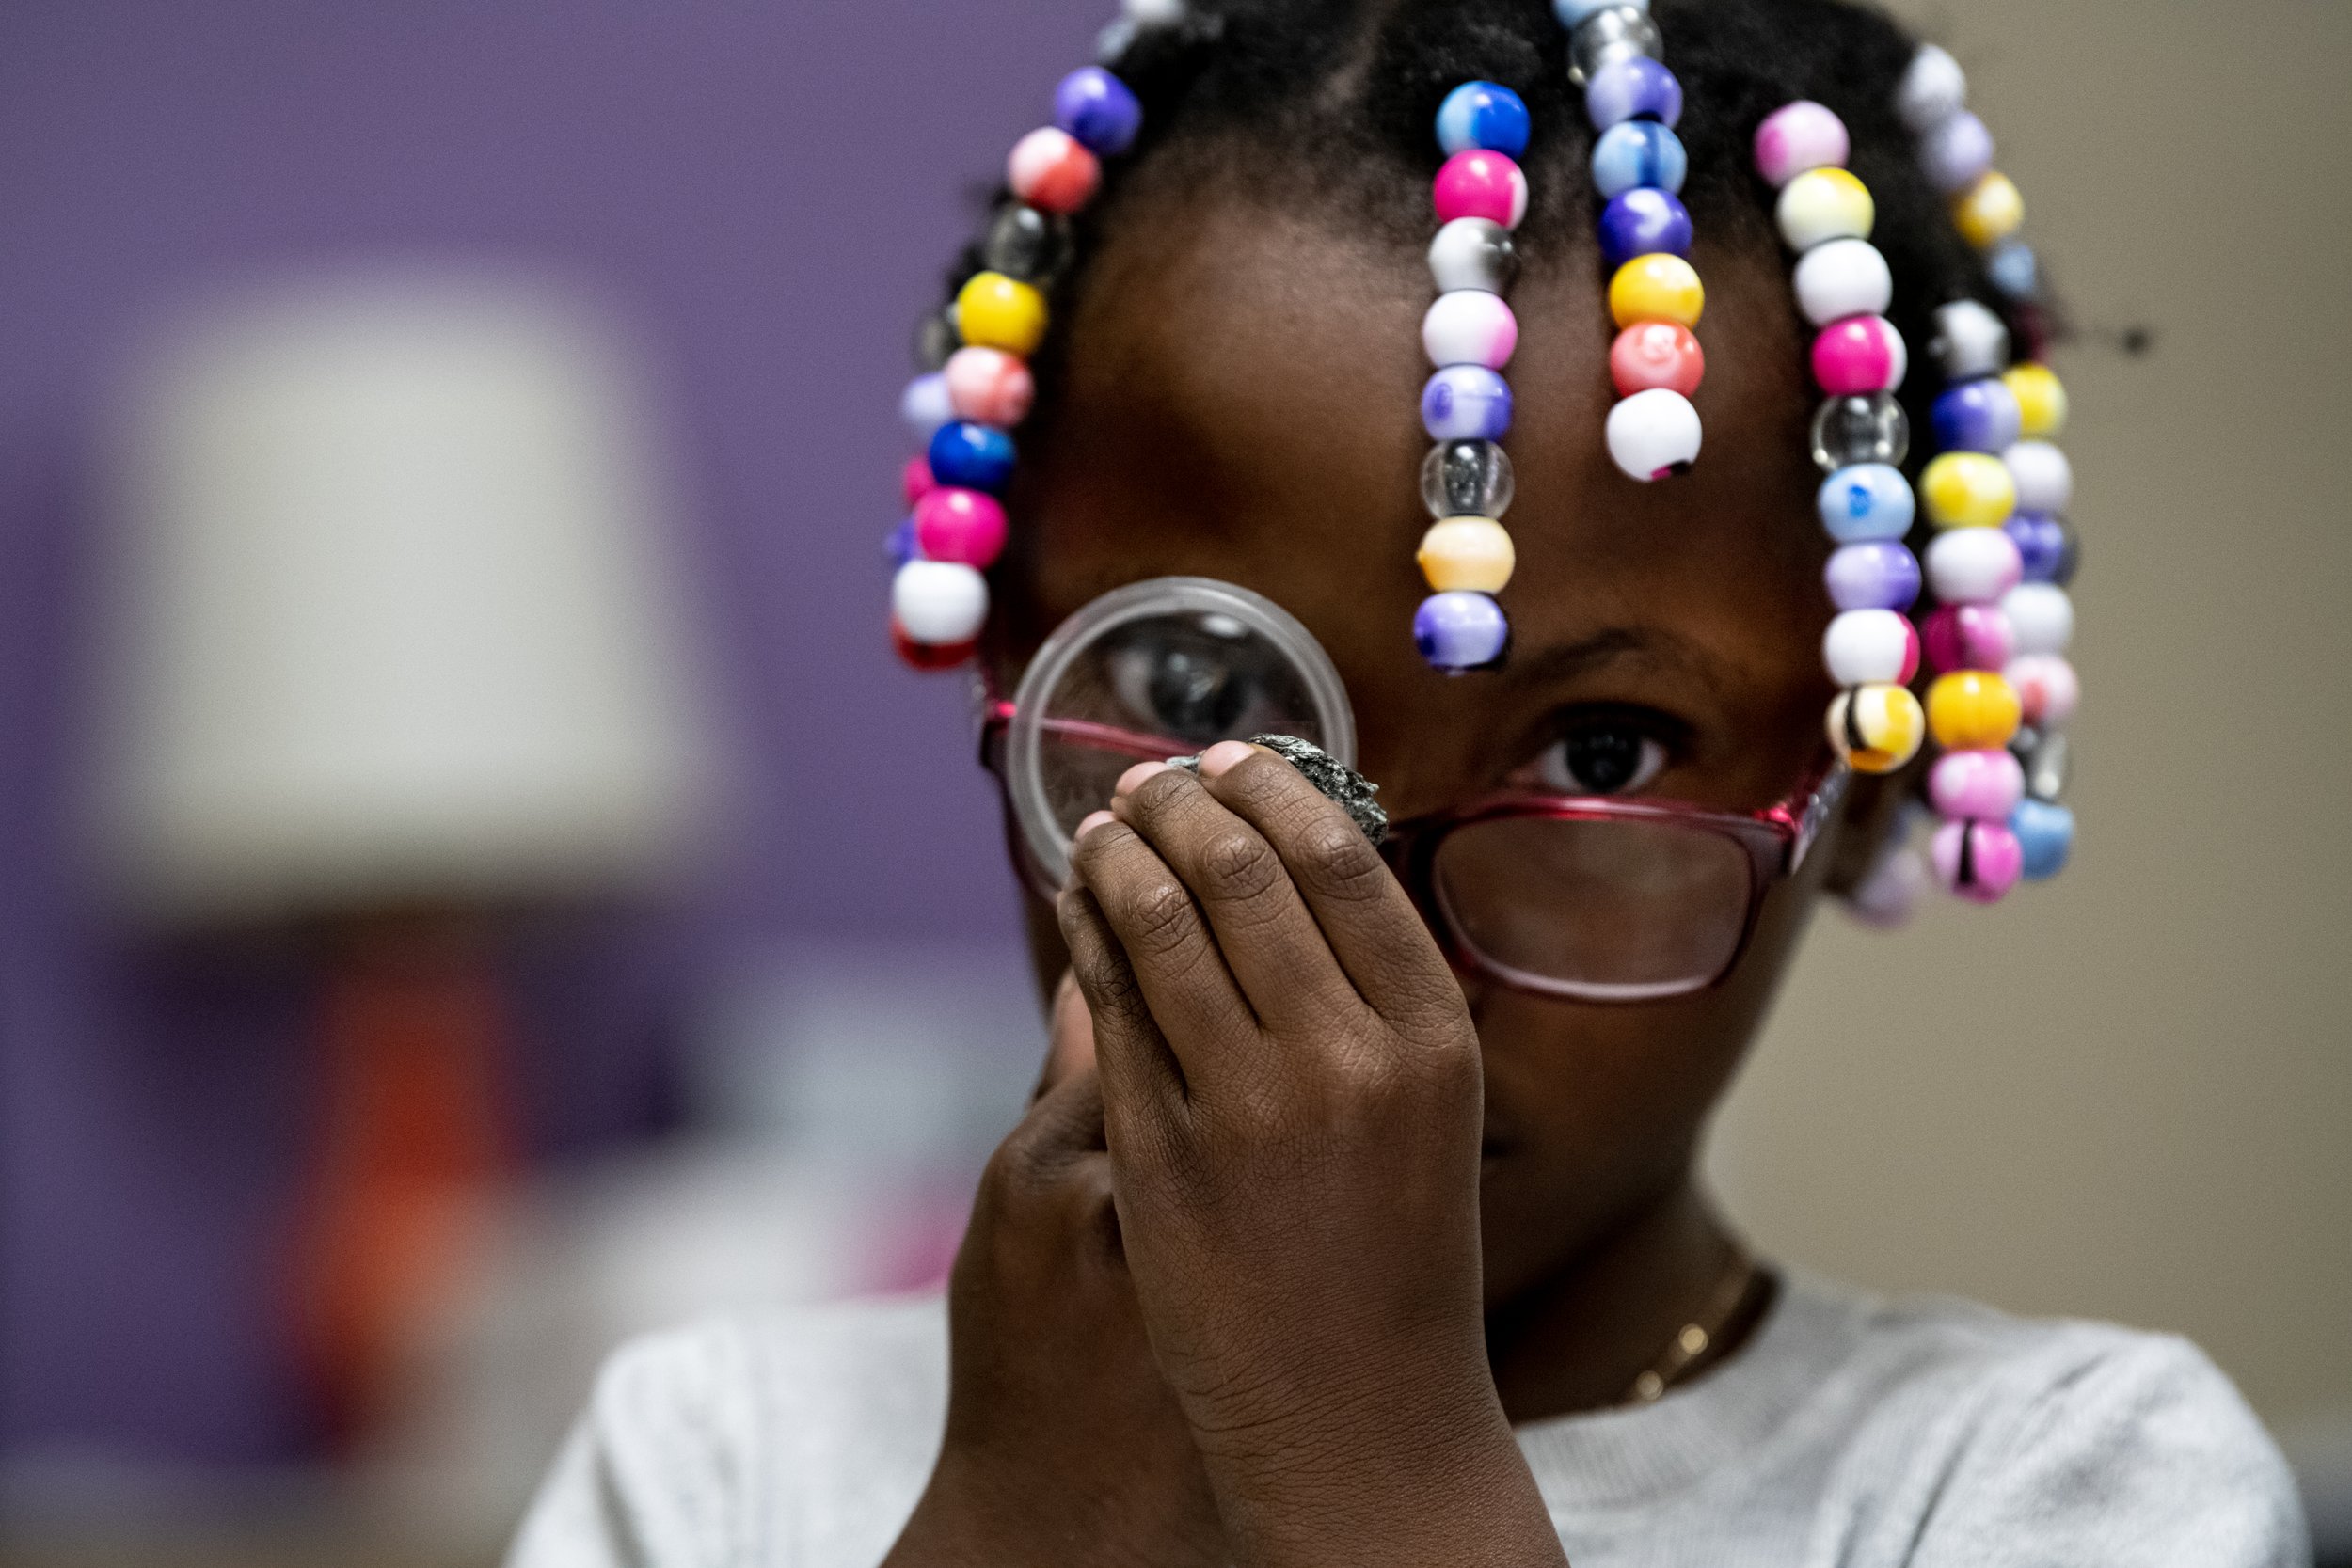  Kacia Williamson examines a rock through a magnifying glass during a second-grade science class on Wednesday, Oct. 26, 2022, at James Monroe Elementary School in Colorado Springs, Colo. 